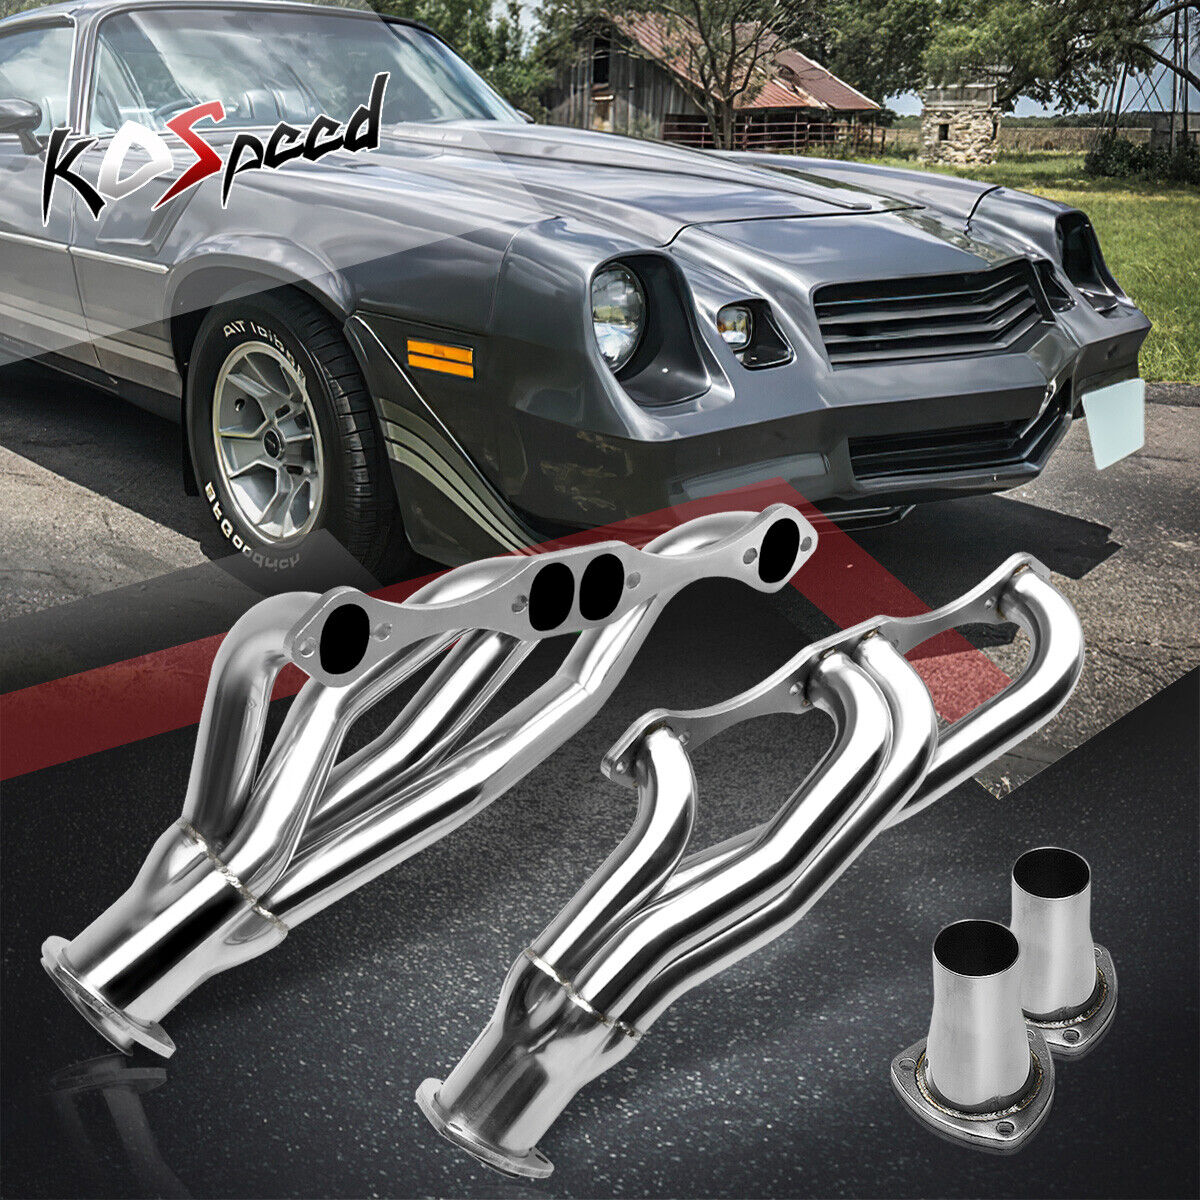 A/F/G BODY STAINLESS STEEL CLIPSTER HEADER EXHAUST FOR 64-88 SMALL BLOCK V8